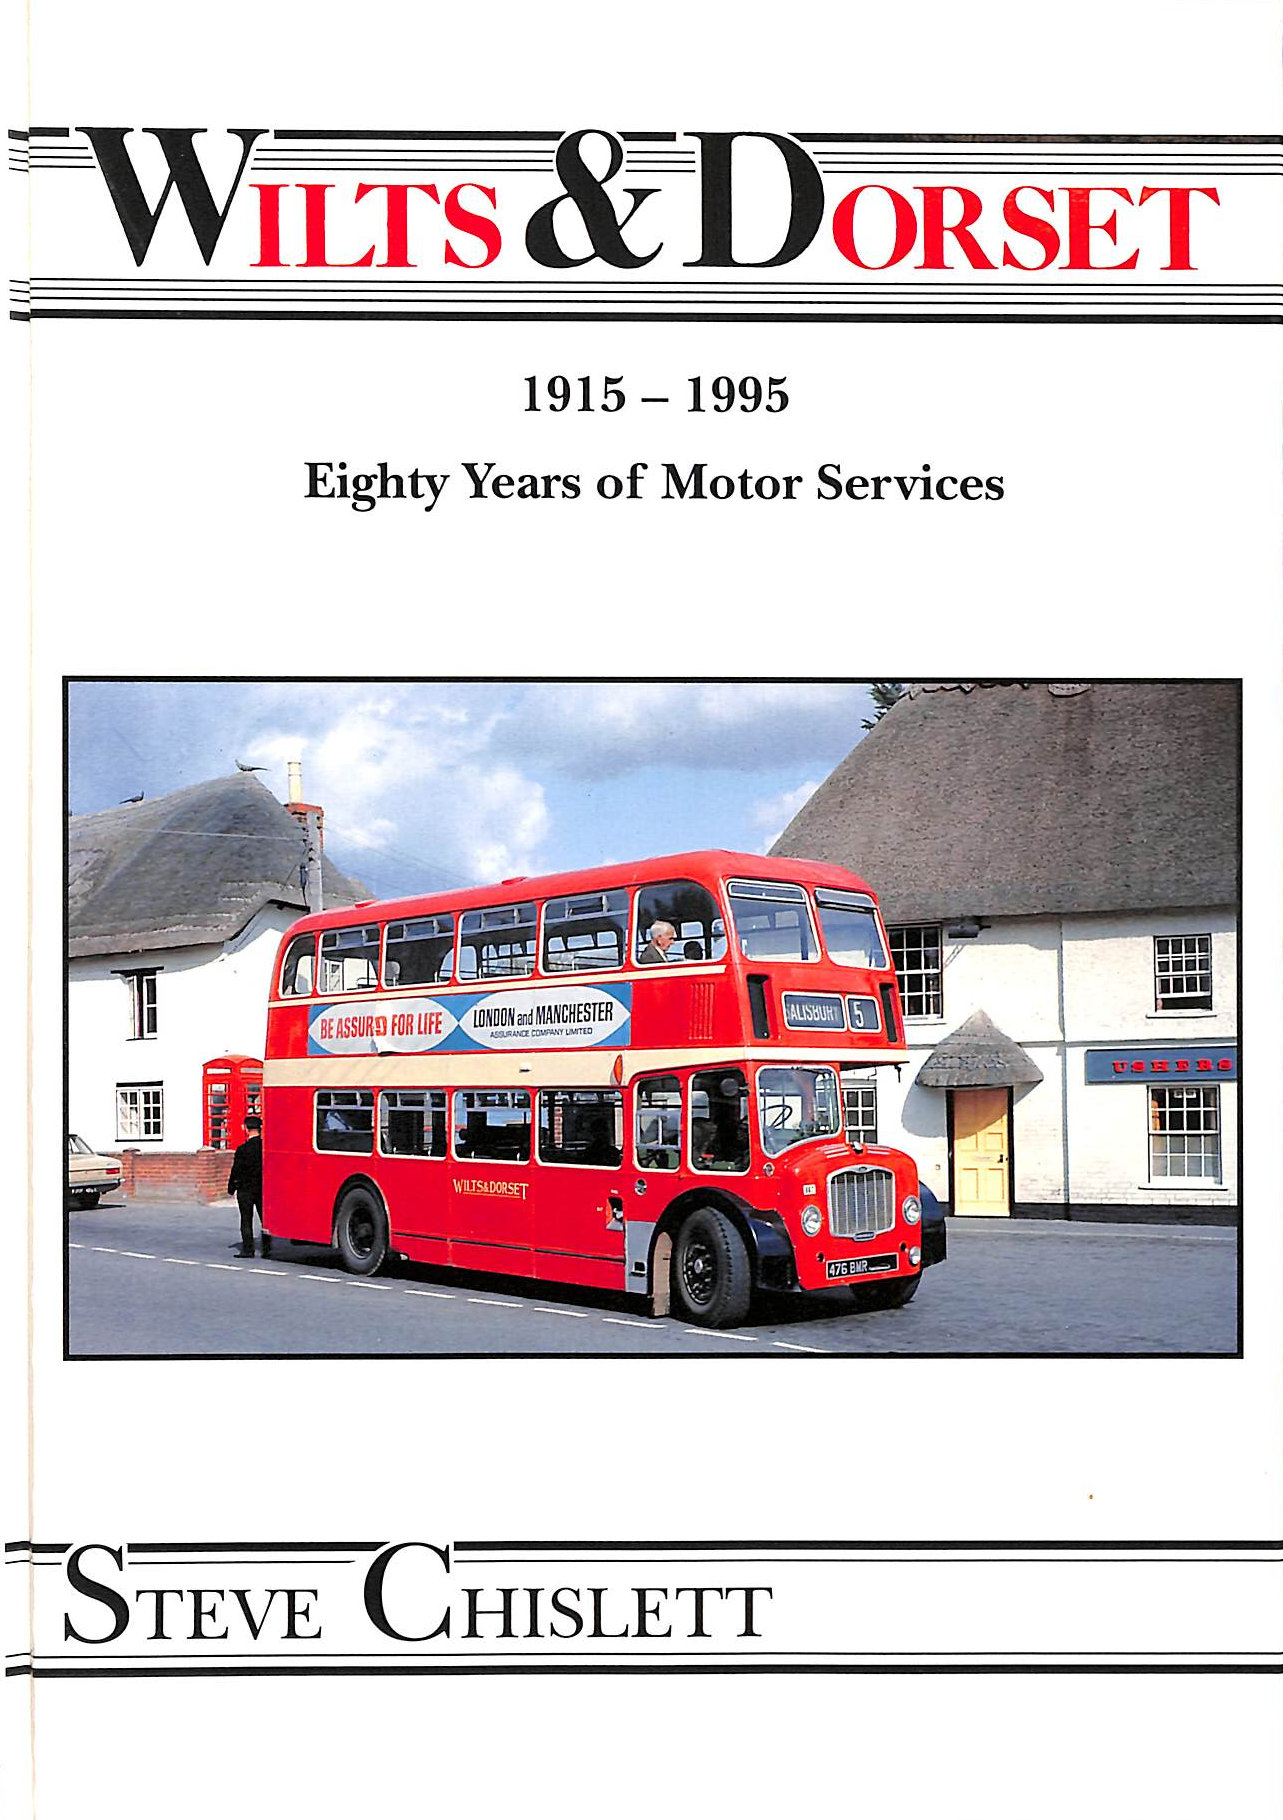 CHISLETT, STEVE - Wilts and Dorset, 1915-95: 80 Years of Motor Services